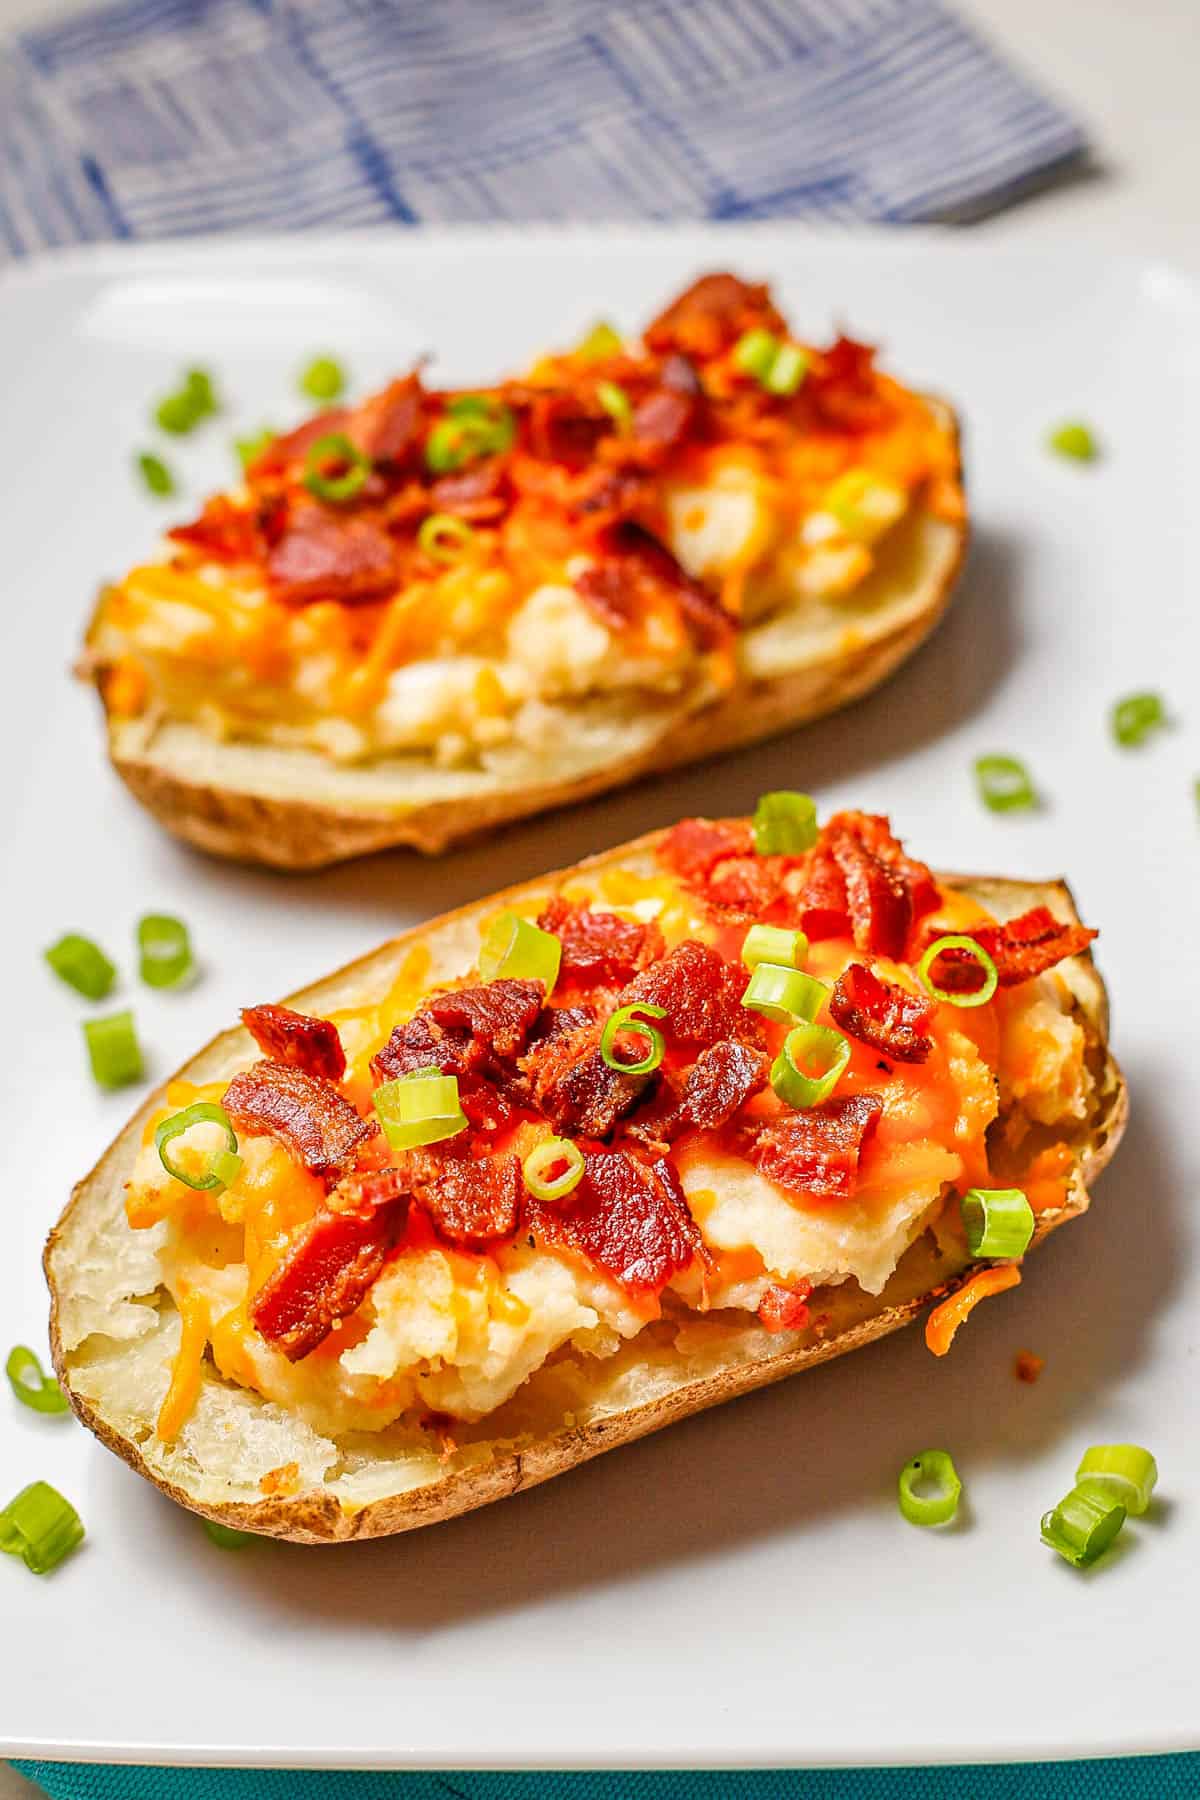 Two halves of a loaded potato with cheese, bacon and green onions on top on a white rectangular serving plate.